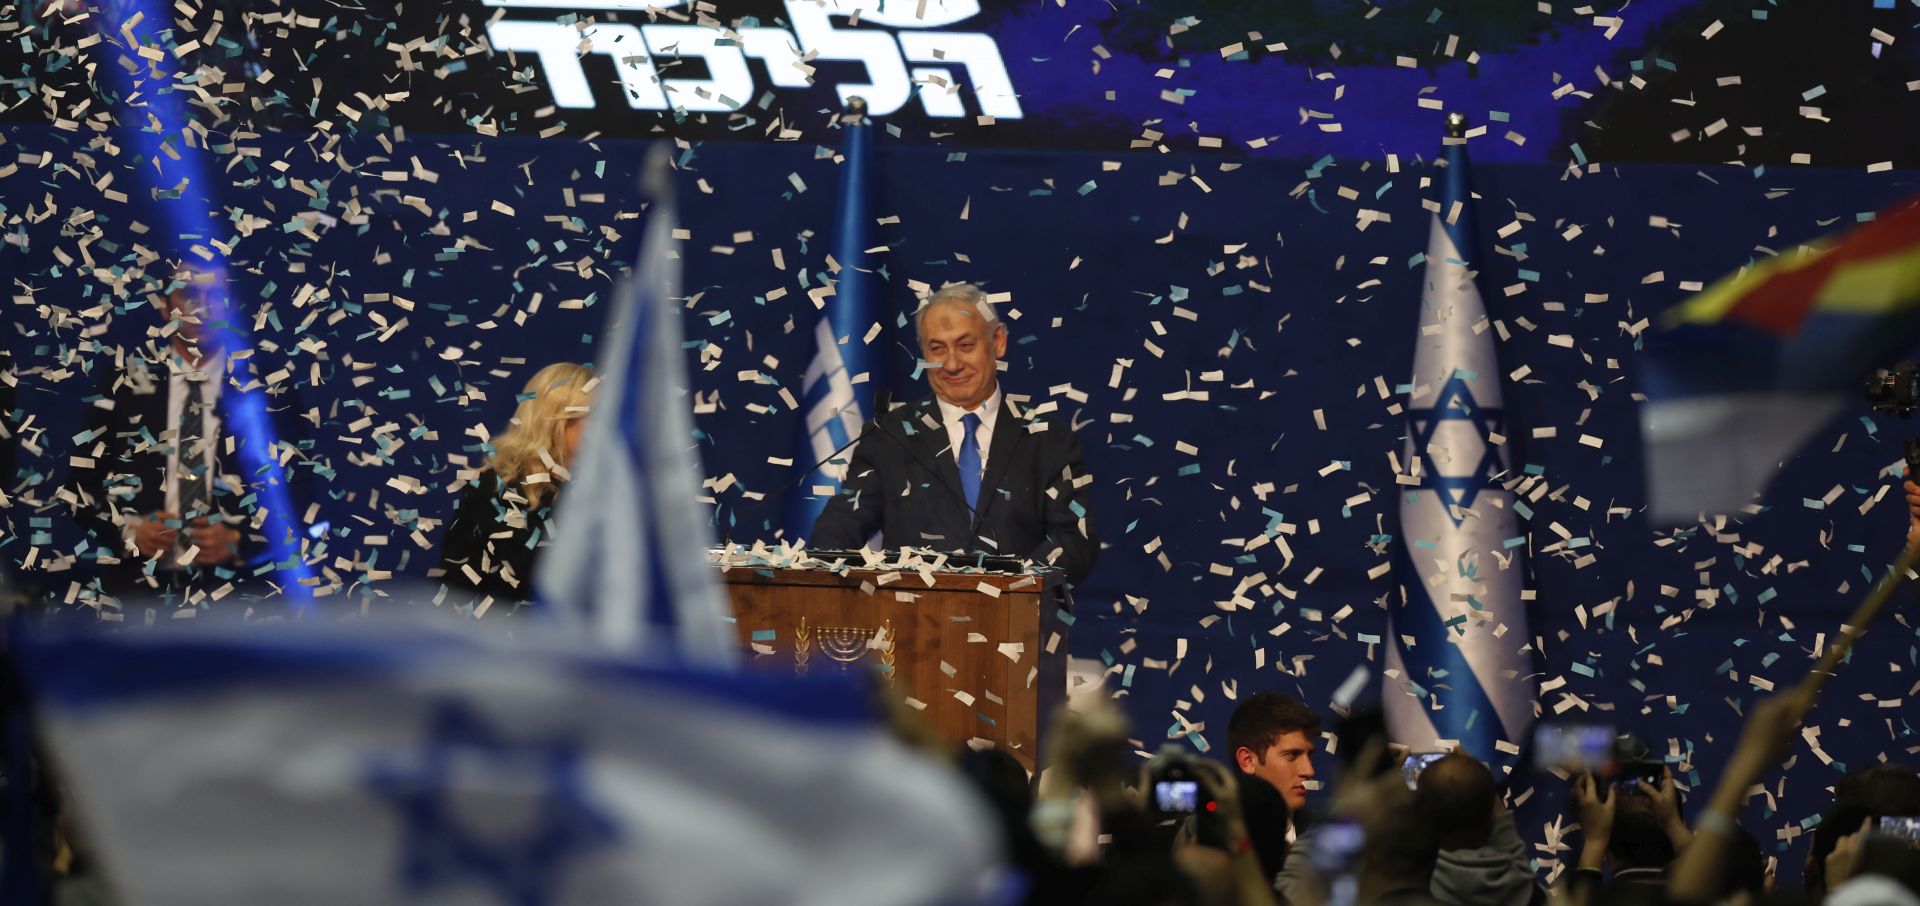 epa08265691 Israeli Prime Minister and Chairman of the Likud Party Benjamin Netanyahu (C) attends a Likud party final election event after early exit polls, in Tel Aviv, Israel, 03 March 2020. It is the third Israeli parliament election in one year.  EPA/ATEF SAFADI